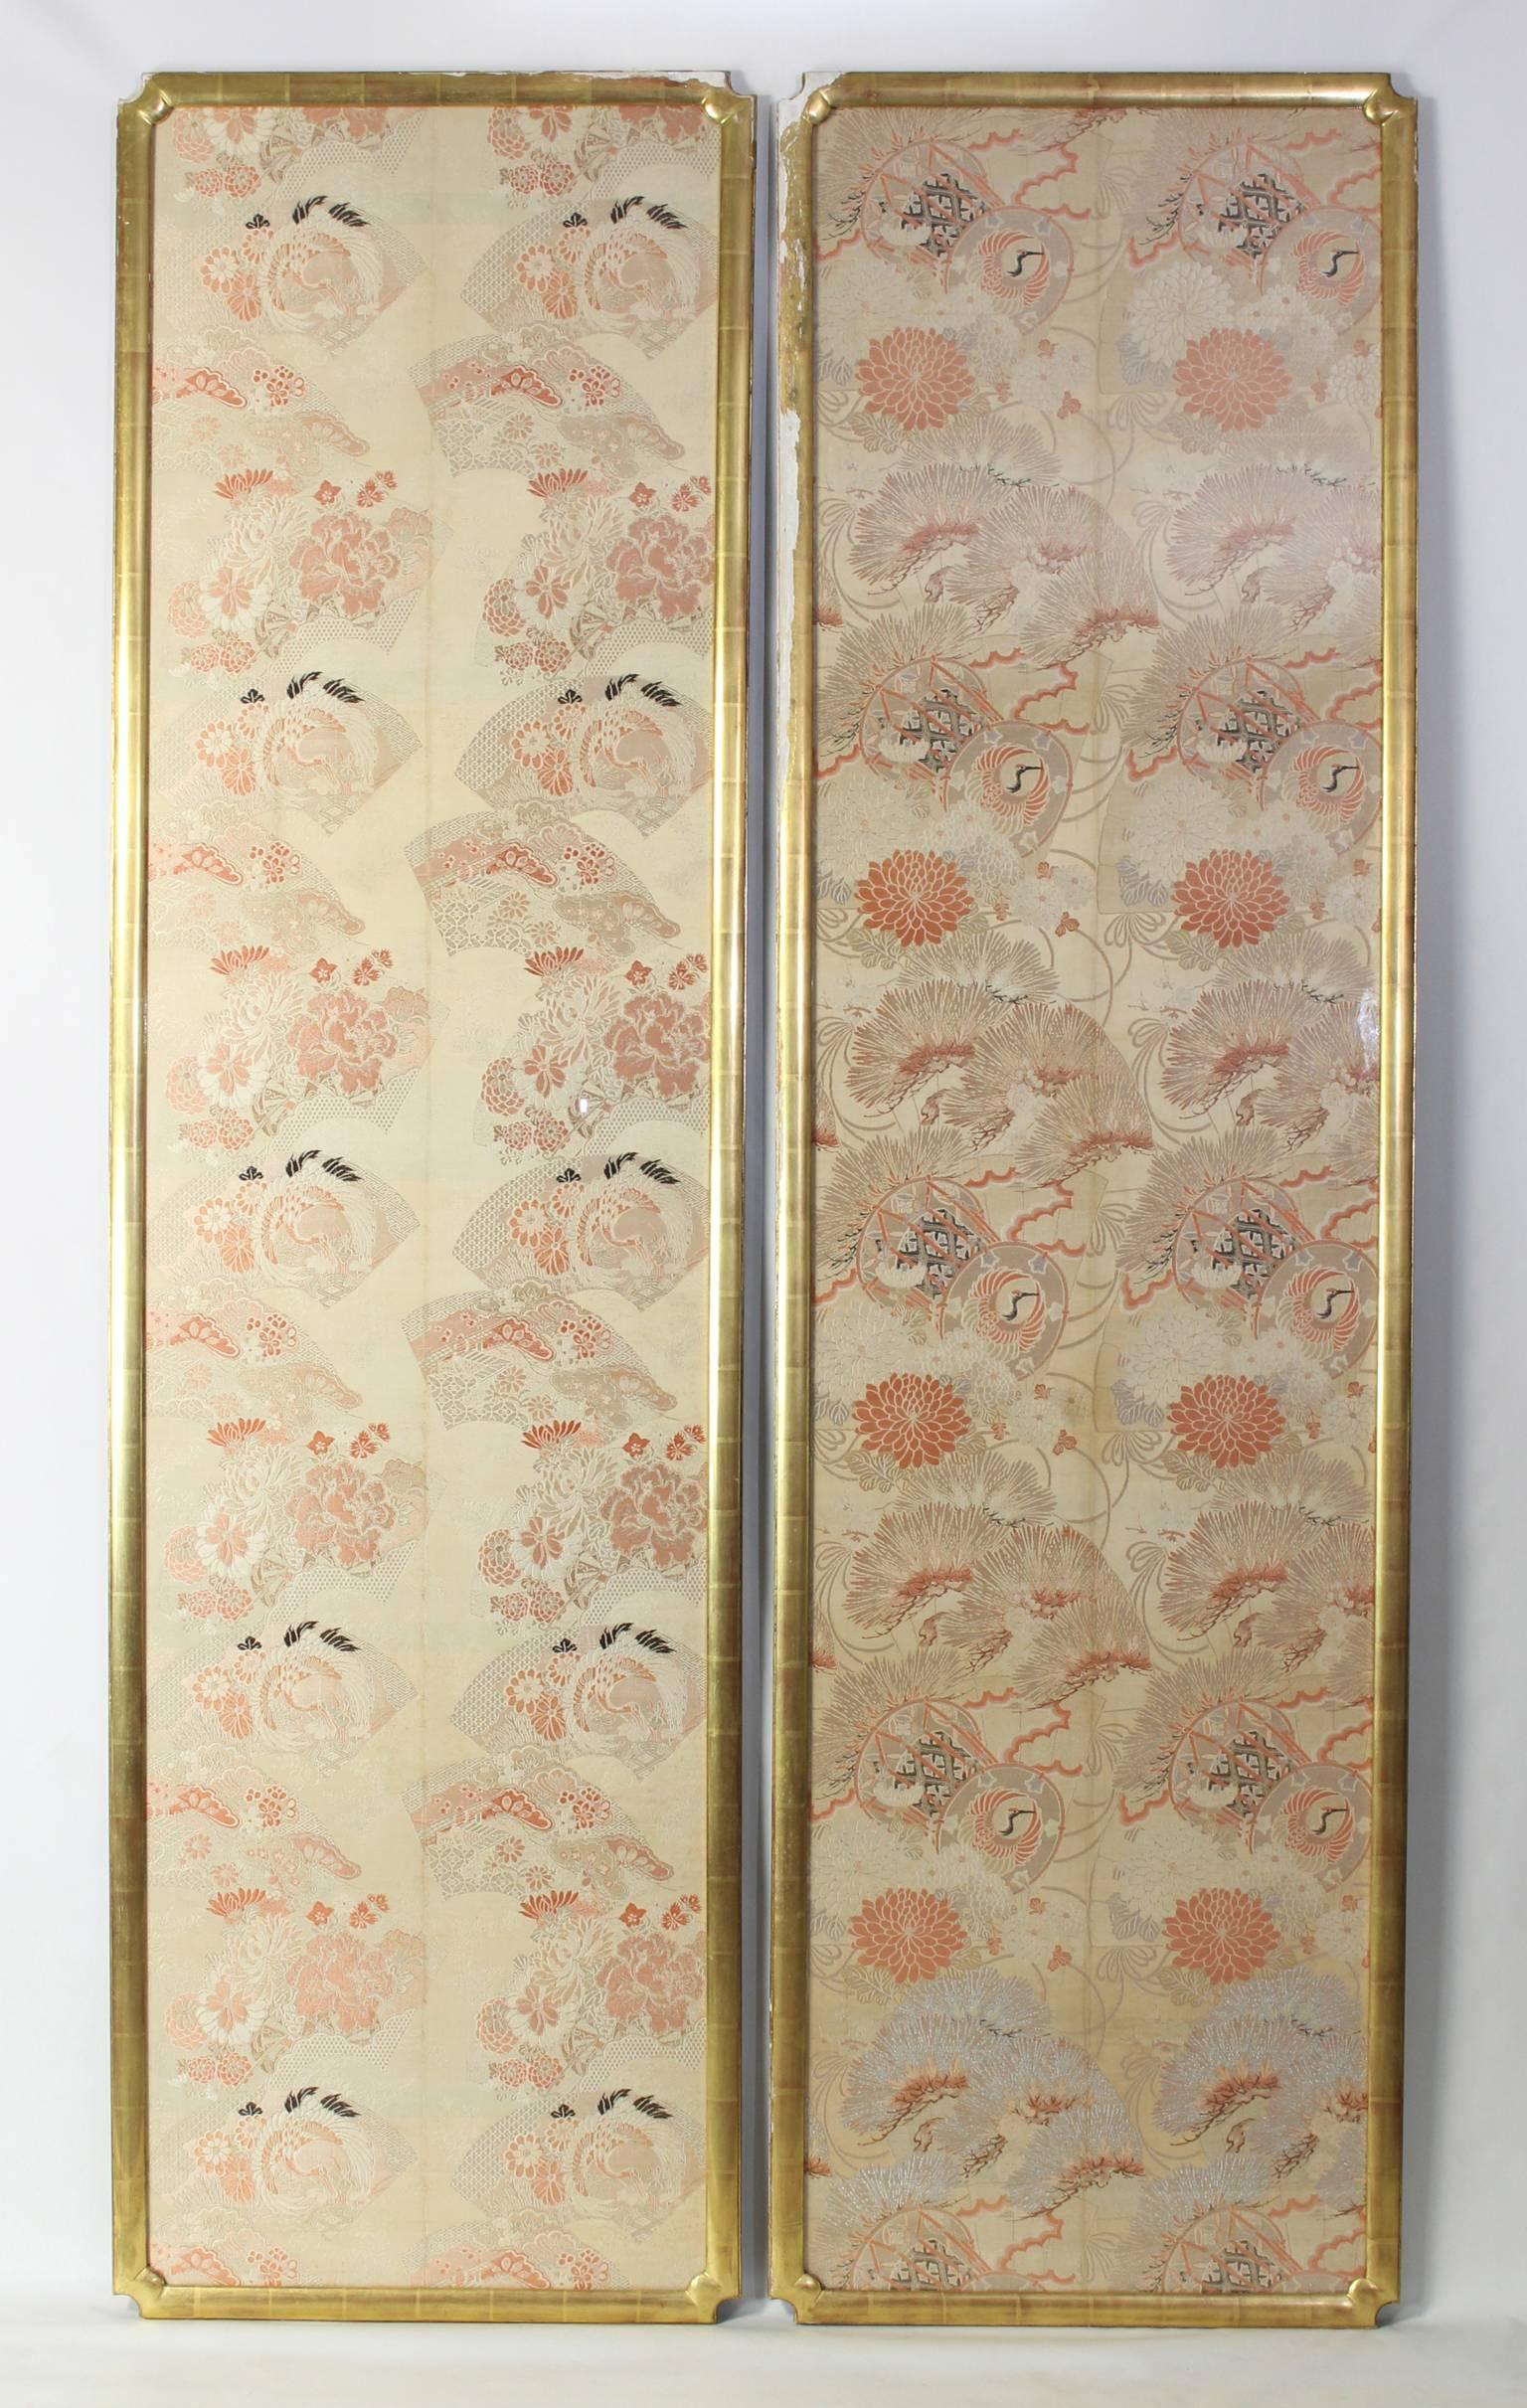 An exceptionally large and stunning pair of late 19th century Japanese silk brocade panels woven in shades of cream, pink, coral and gold with black accents mounted in 24k water gilt frames.